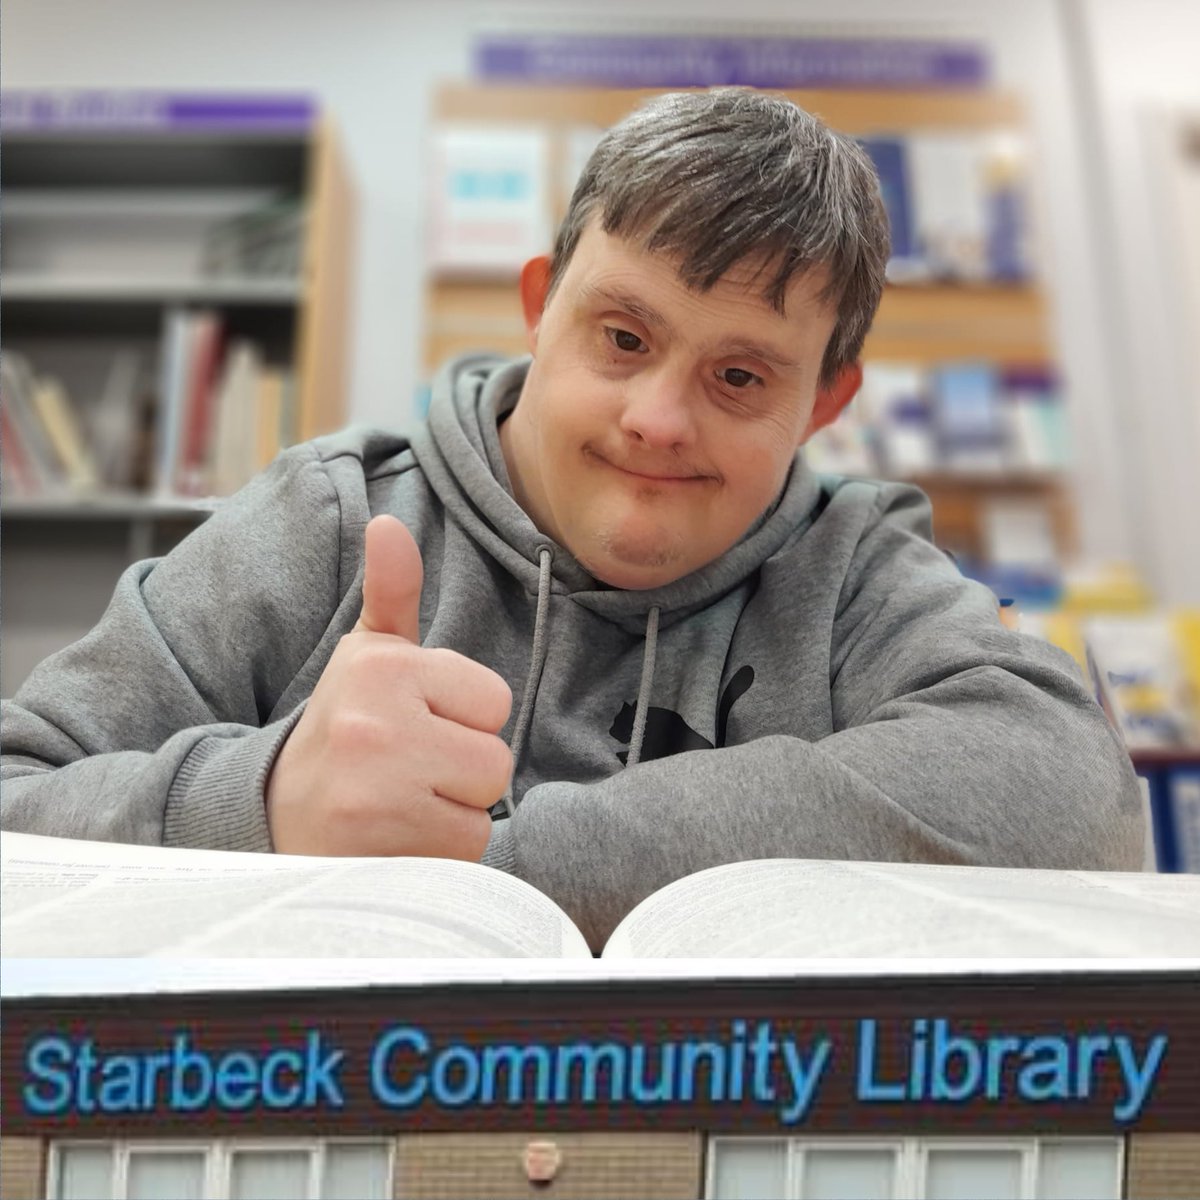 One of the things we love about our libraries is their commitment to being welcoming and inclusive for everyone 📖

#inclusive #diversity #everyoneiswelcome #libraries #loveyourlibrary #community #supportwork #socialcare #everydayisdifferent #makeadifference